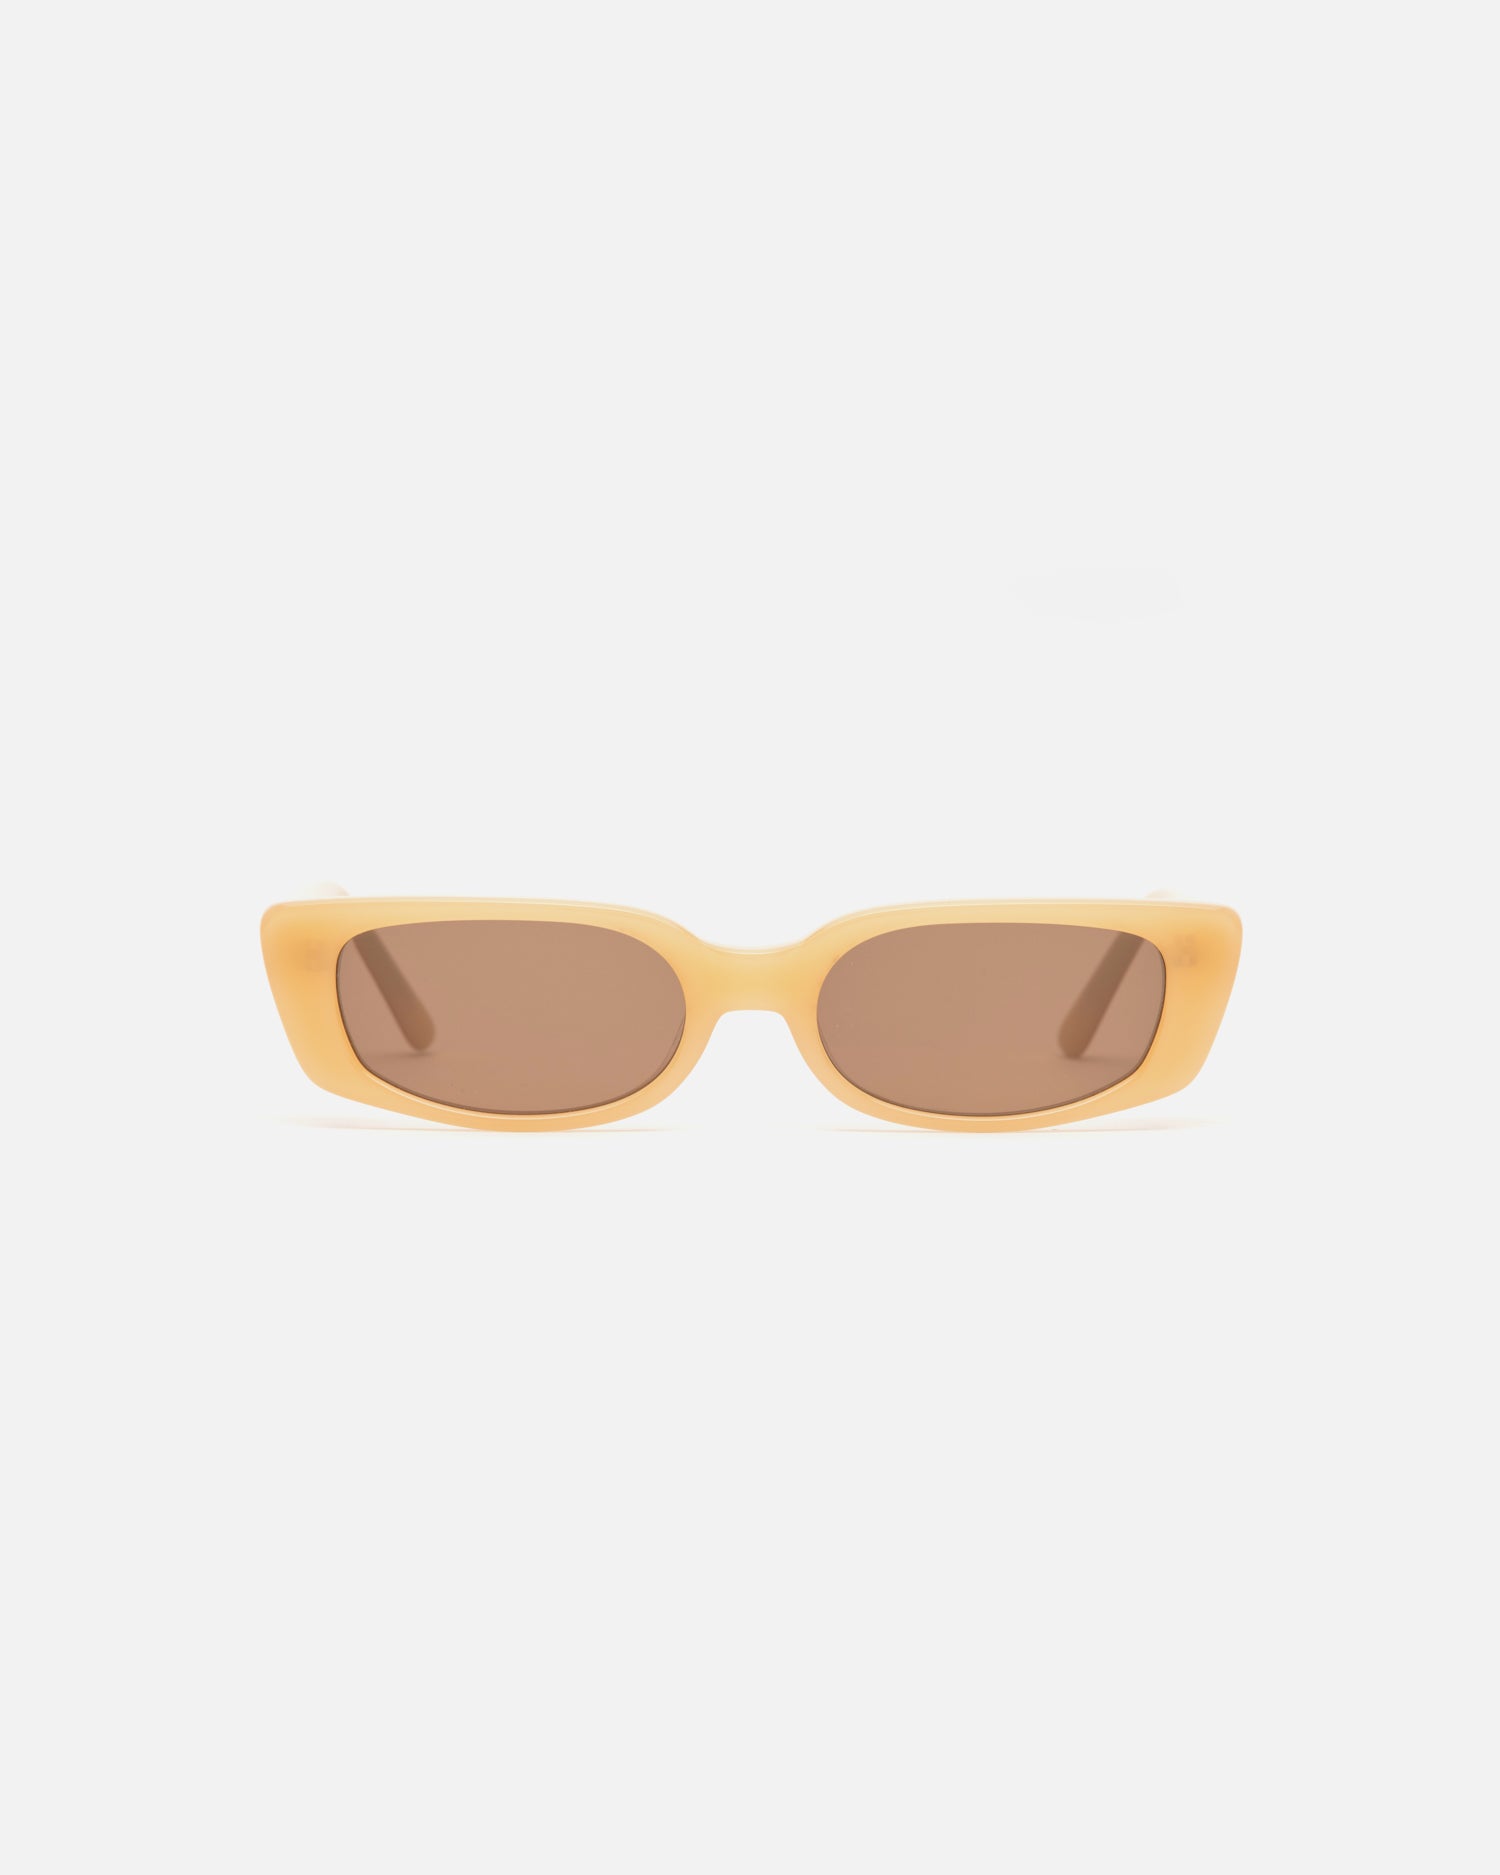 Lu Goldie Sabine Sunglasses in yellow acetate with brown lenses, front image